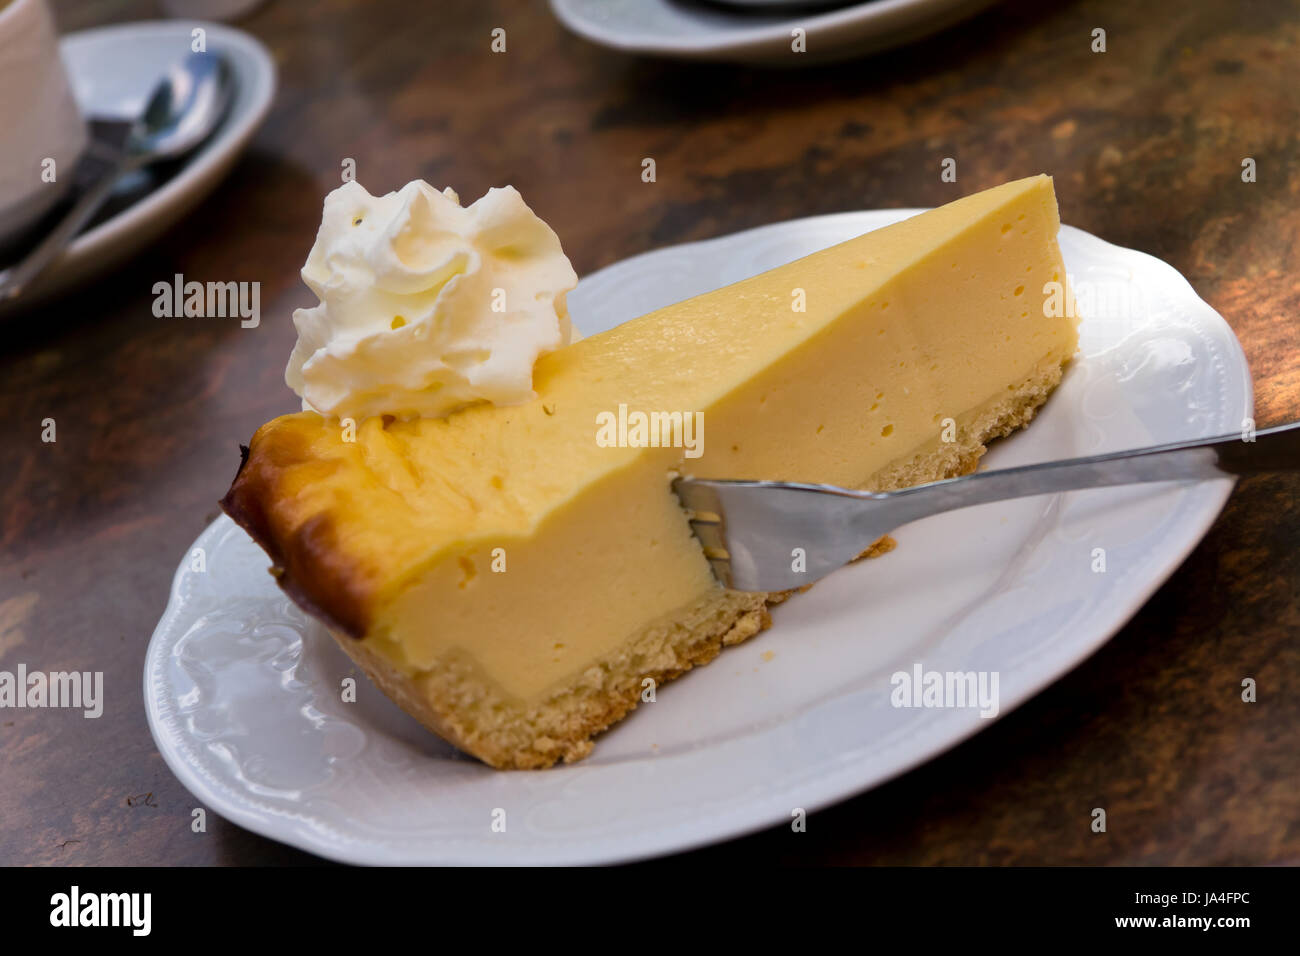 cafe, food, aliment, nibble, plate, cake, pie, cakes, dainty, taste, diet, Stock Photo